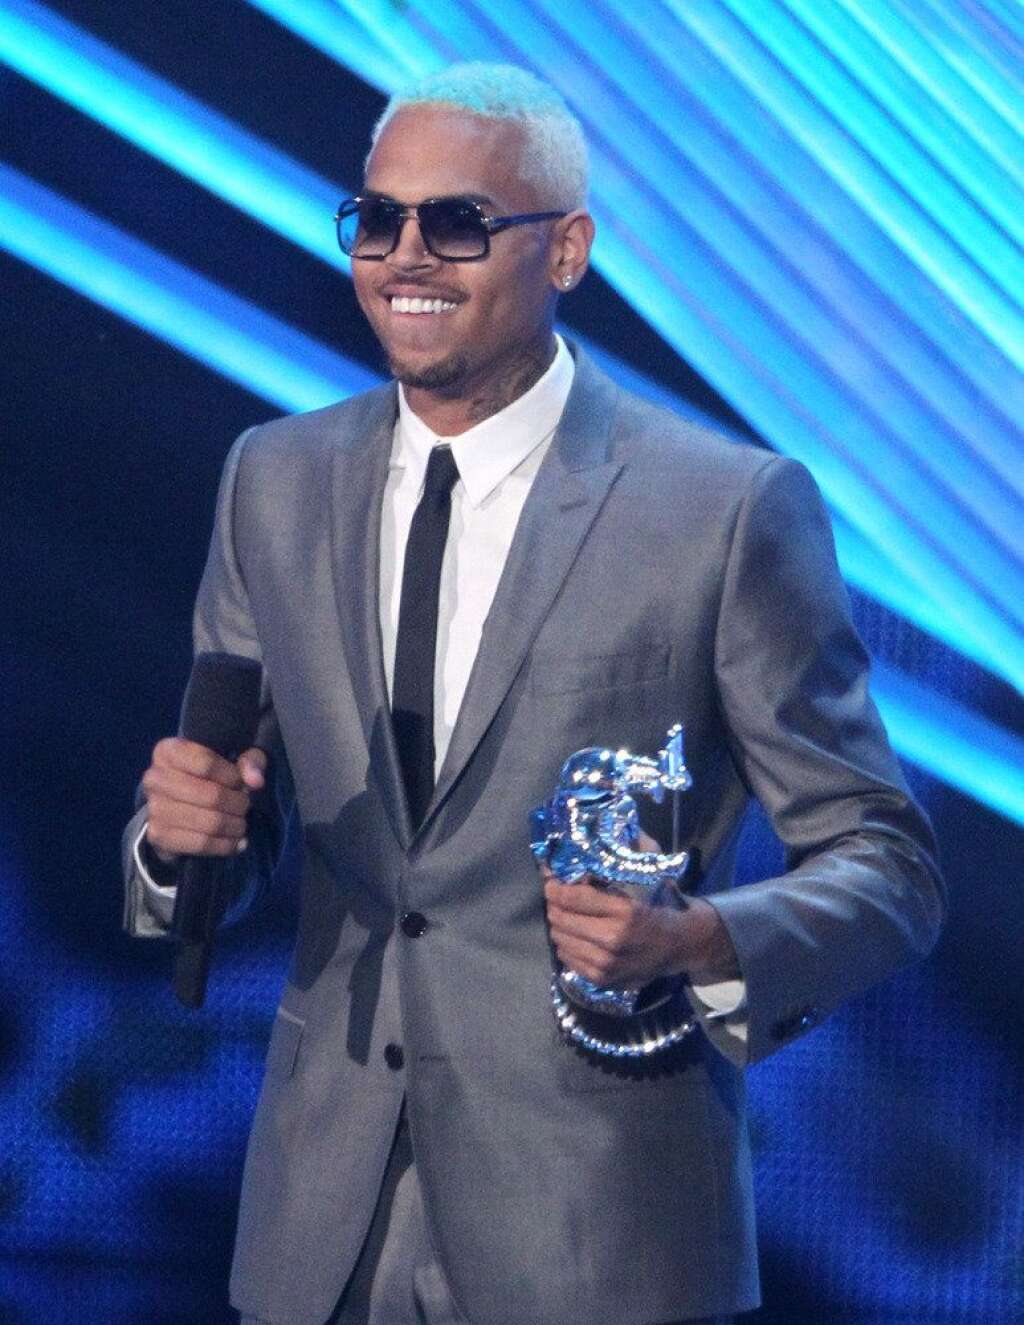 Chris Brown - Chris Brown accepts the award for best male video for "Turn Up the Music" at the MTV Video Music Awards on Thursday, Sept. 6, 2012, in Los Angeles. (Photo by Matt Sayles/Invision/AP)